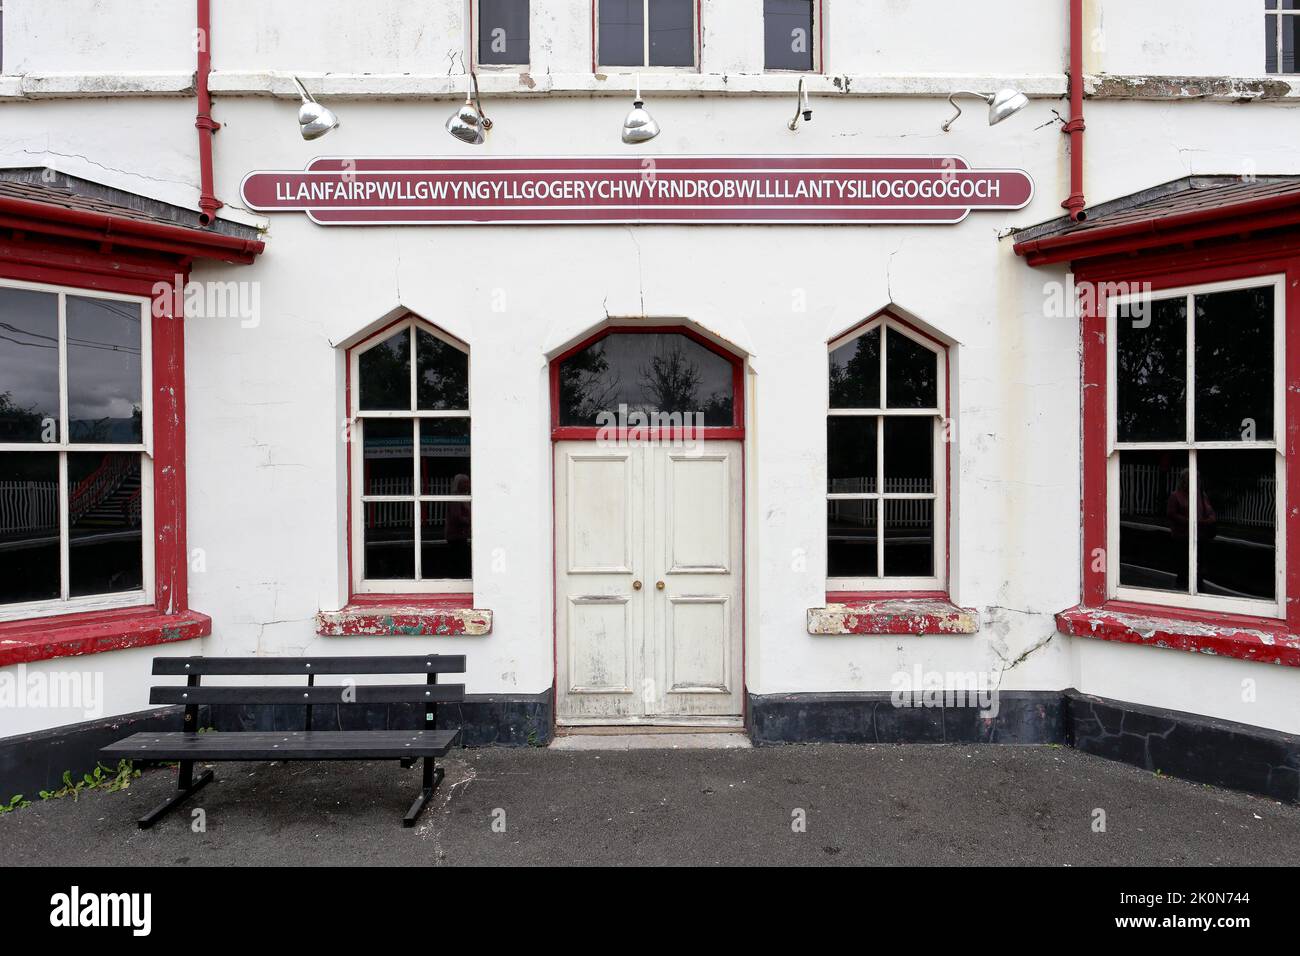 Front of the disused Llanfairpwll railway station building including the famous sign, Llanfairpwll, Isle of Anglesey, Ynys Mon, North Wales, UK. Stock Photo